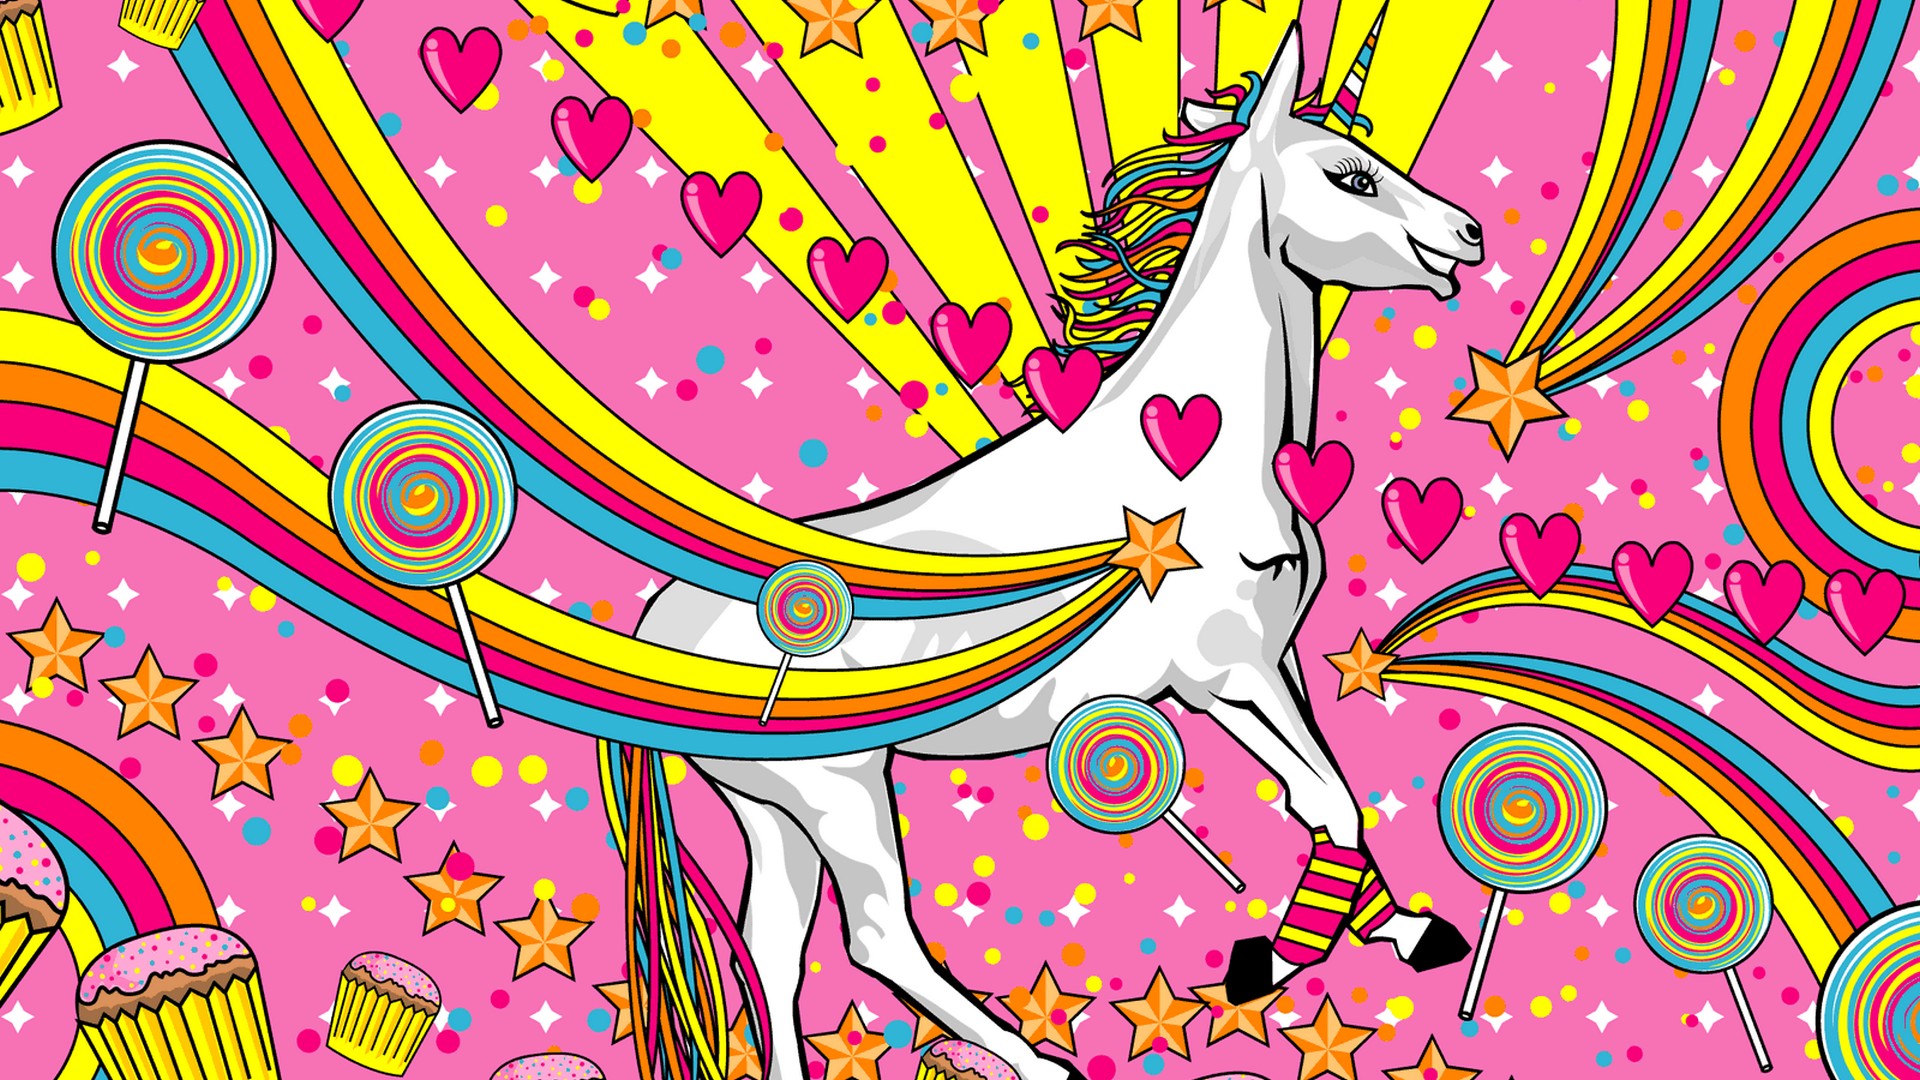 Best Cute Unicorn Wallpaper with high-resolution 1920x1080 pixel. You can use this wallpaper for your Windows and Mac OS computers as well as your Android and iPhone smartphones